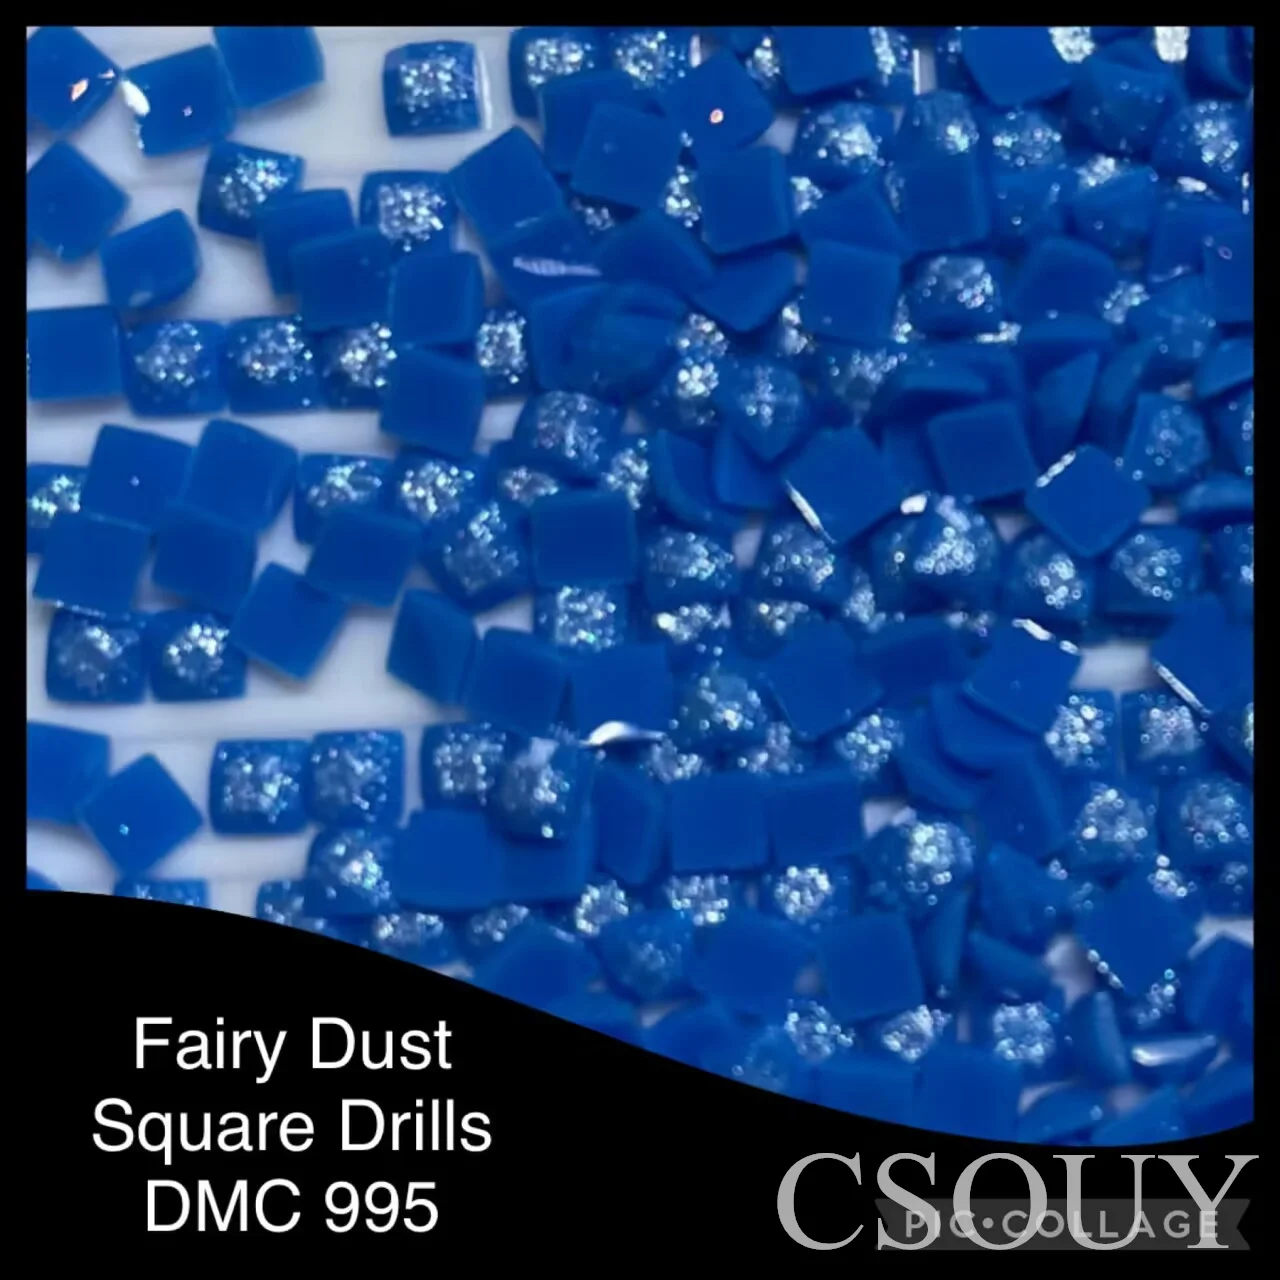 Mix Color Fairy Dust Drills Square 5D DIY Diamond Painting Cross Stitch Embroidery Rhinestones Colorful Mosaic Fairy Dust Colore